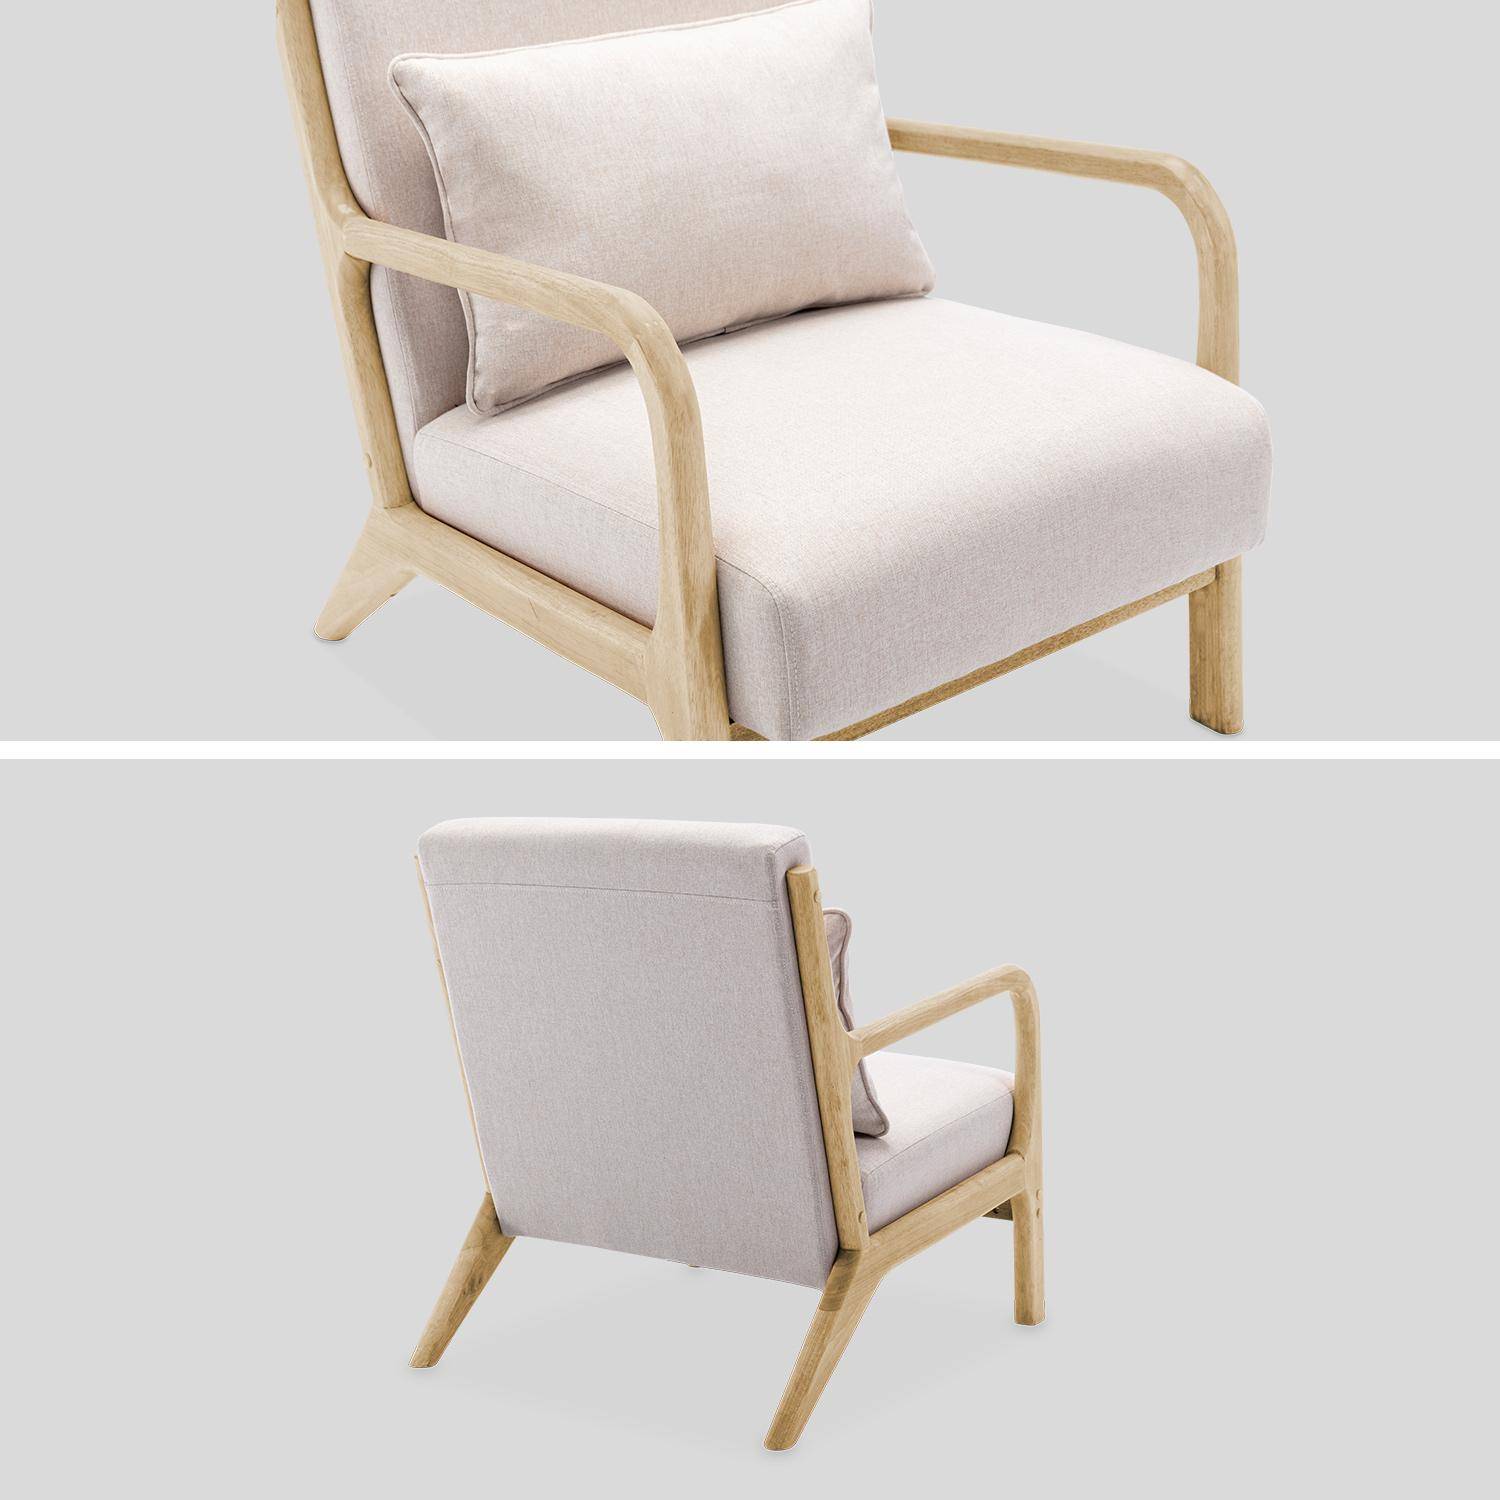 Wooden armchair with scandi-style compass legs and cushion - Lorens - Beige,sweeek,Photo6